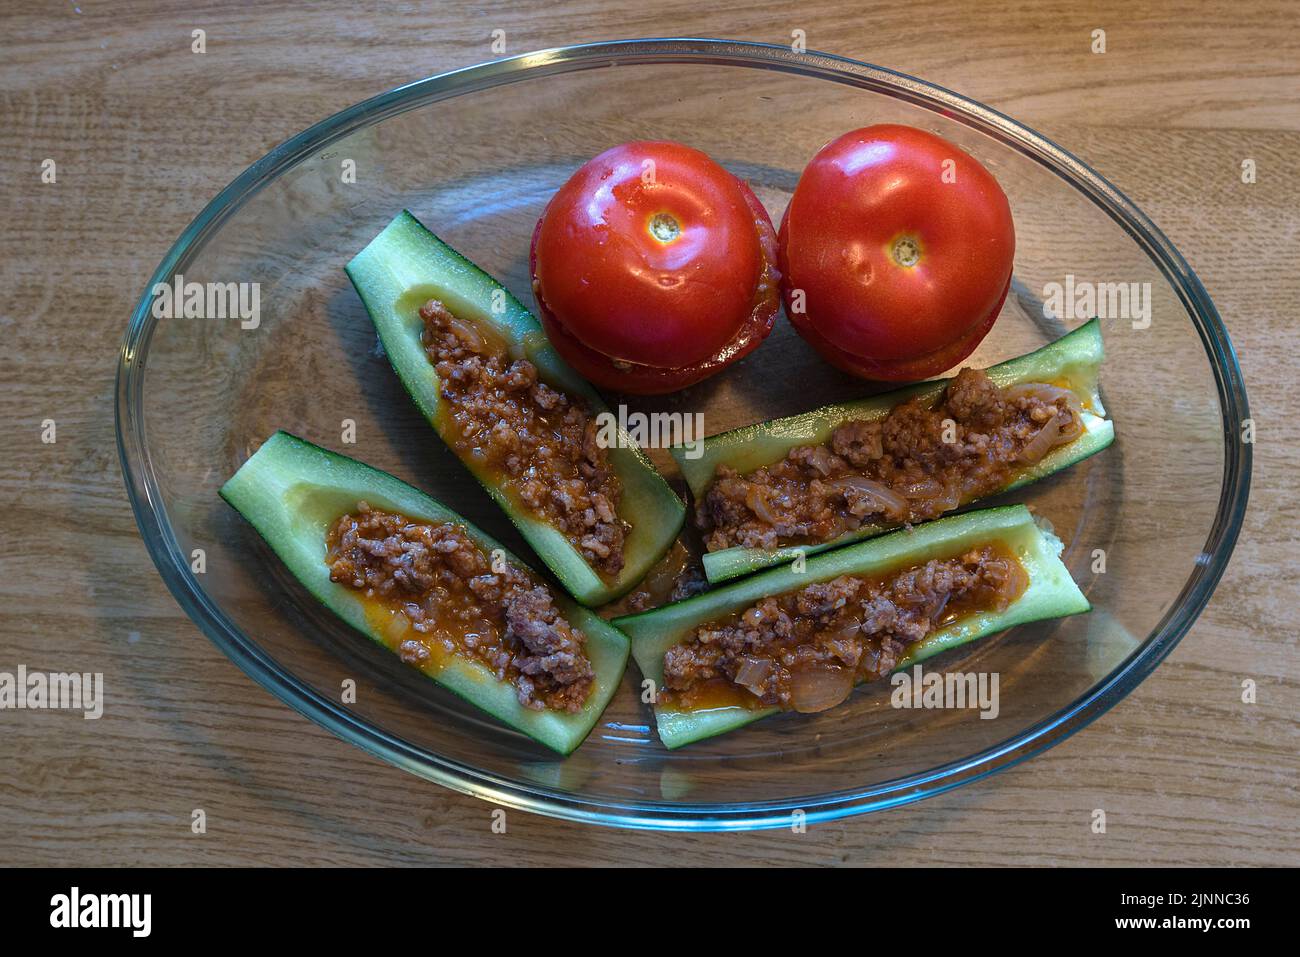 Stuffed peppers and tomatoes in a glass casserole on a wooden table, Bavaria, Germany Stock Photo